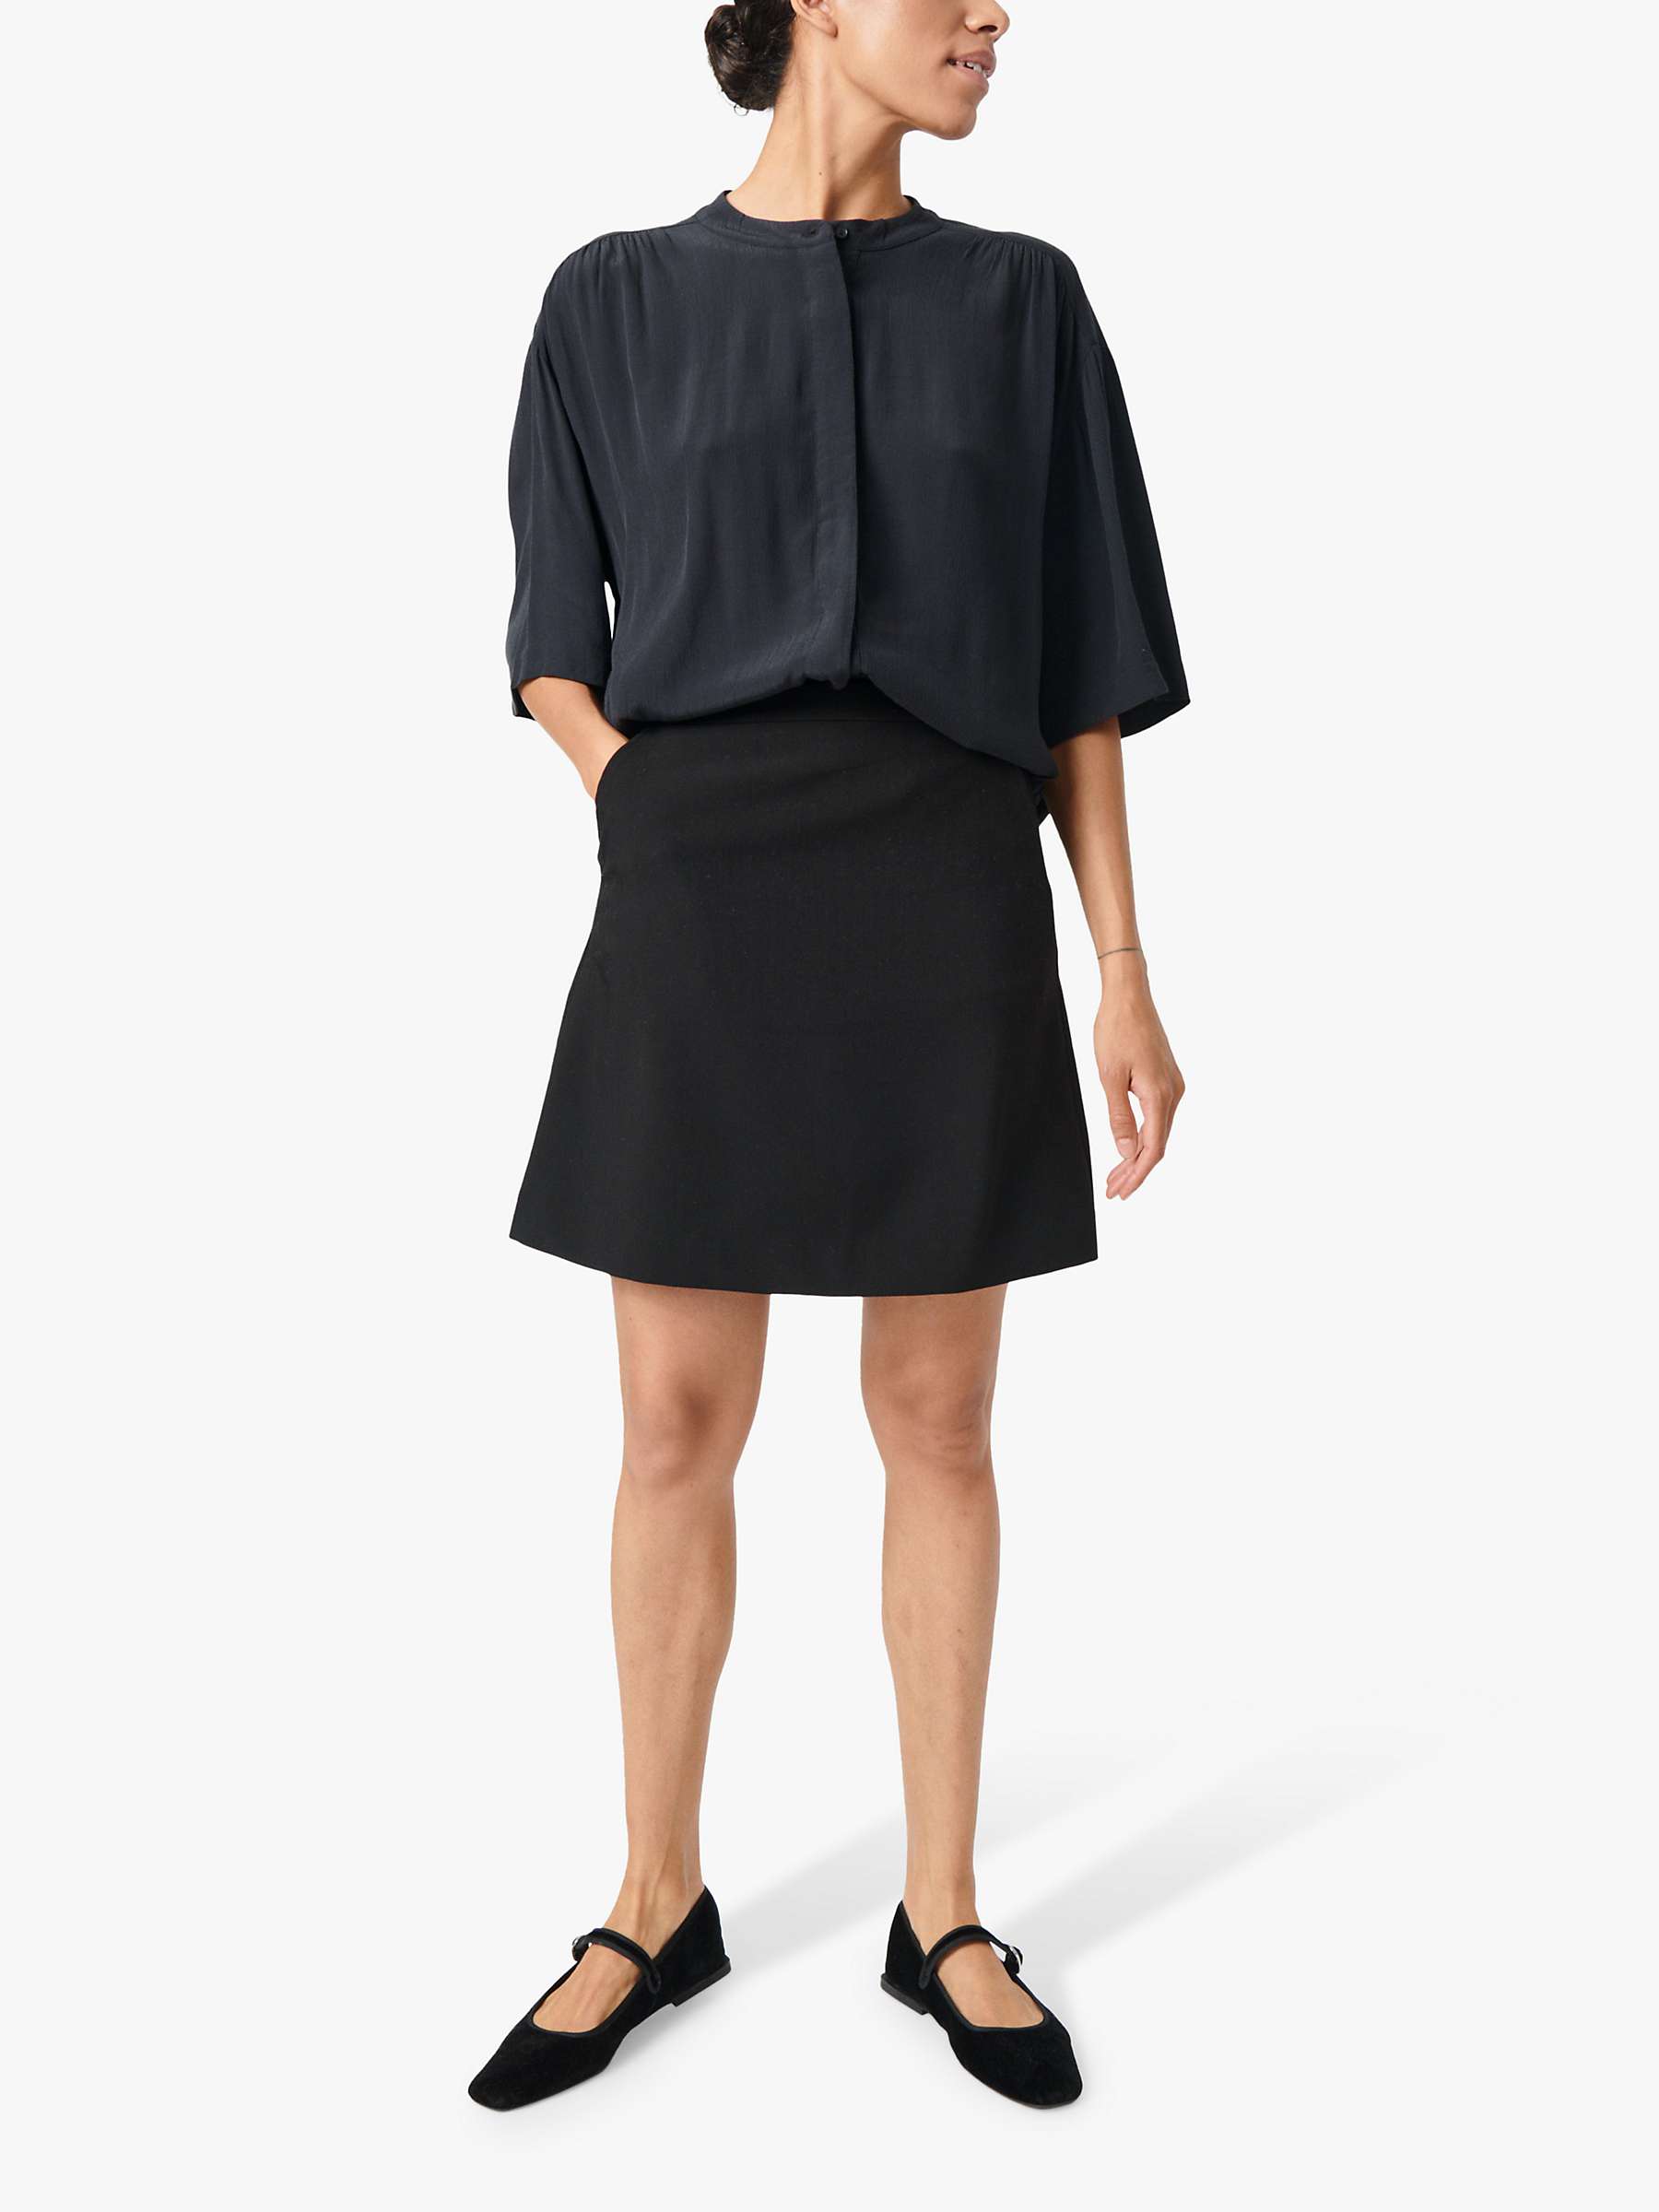 Buy Soaked In Luxury Layna Loose Fit Top Online at johnlewis.com